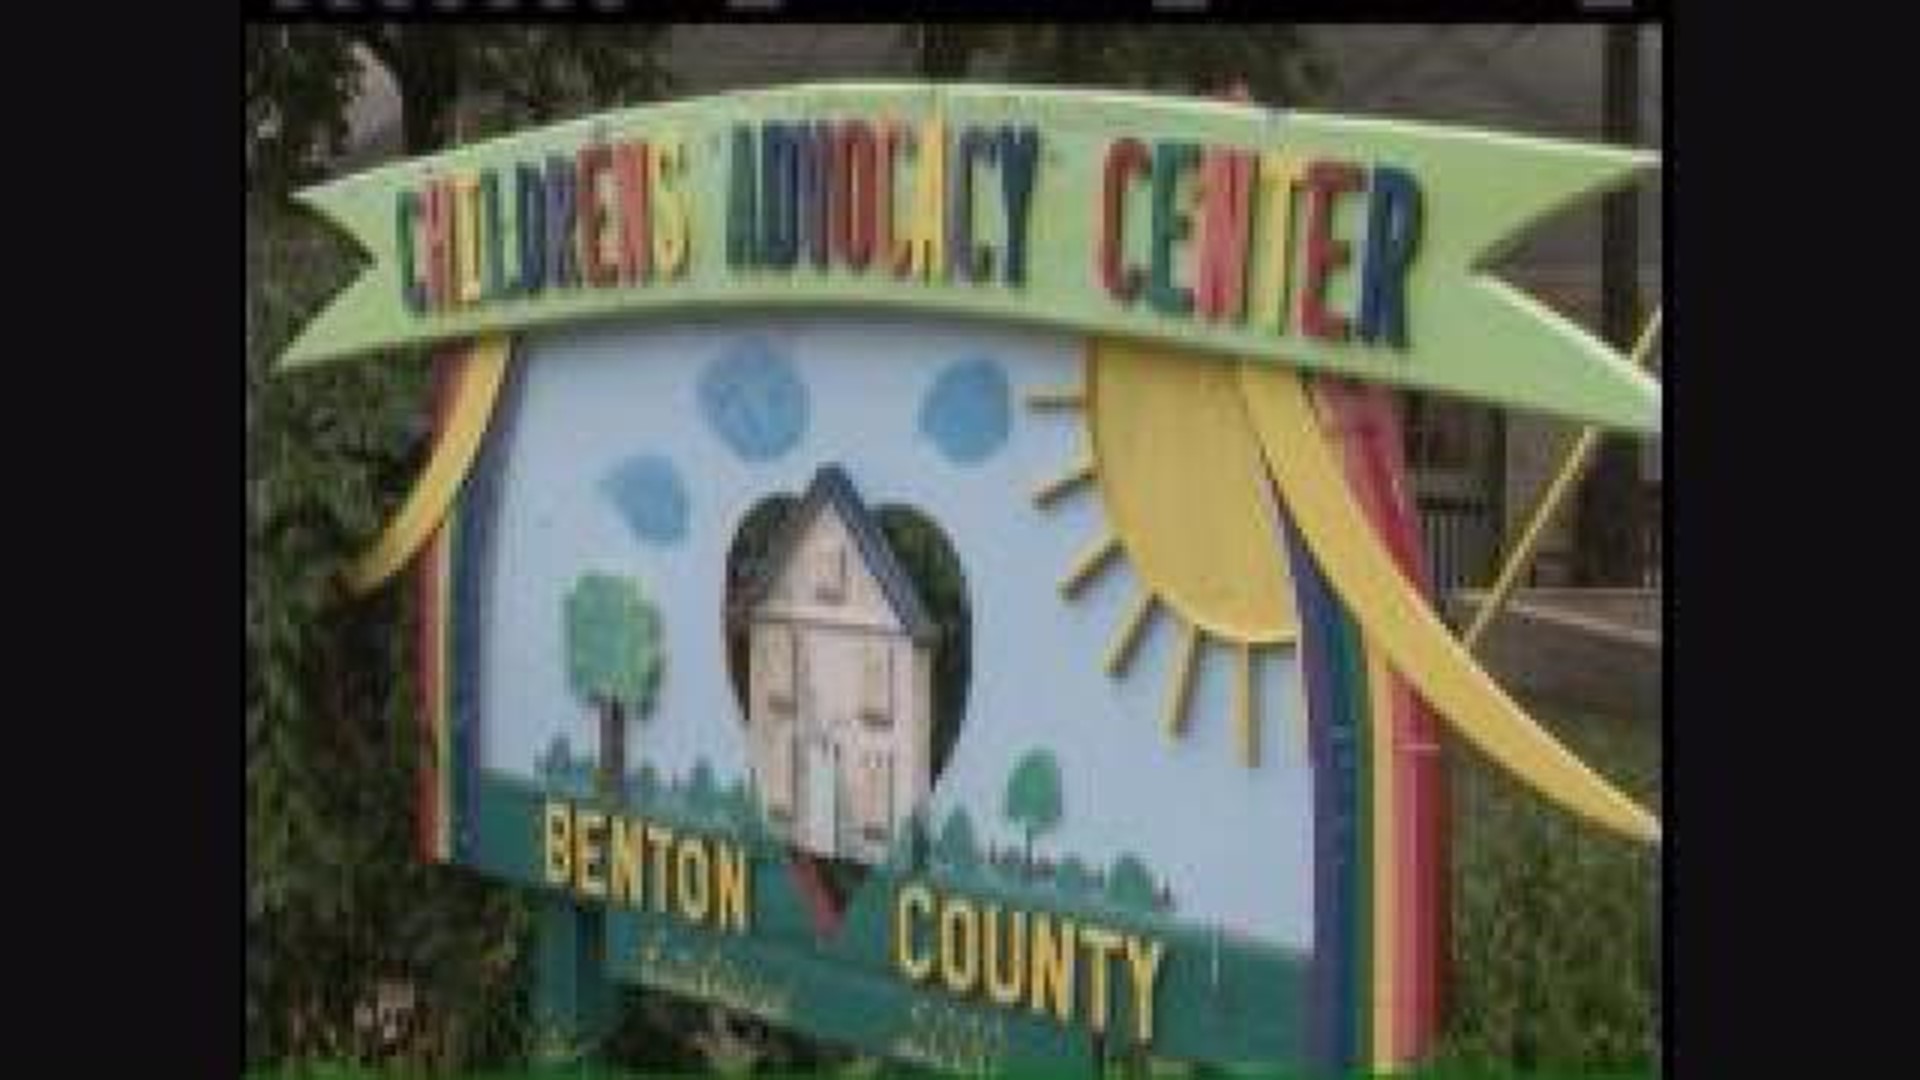 Record Number of Child Abuse Cases in Benton County